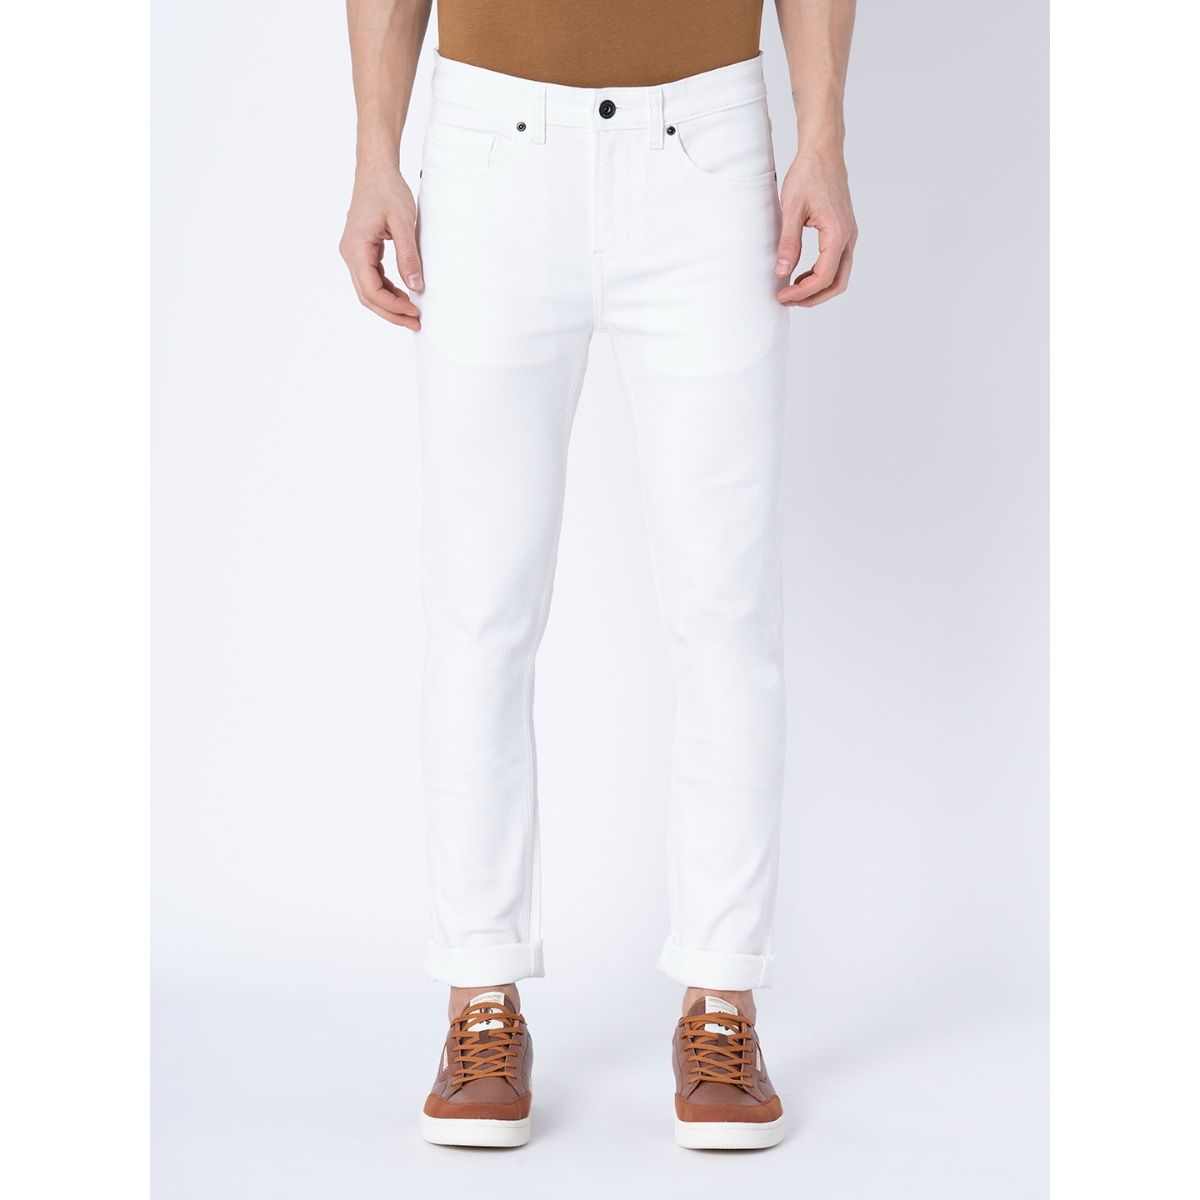 Buy WES Casuals Off-White Slim-Fit Chinos from Westside